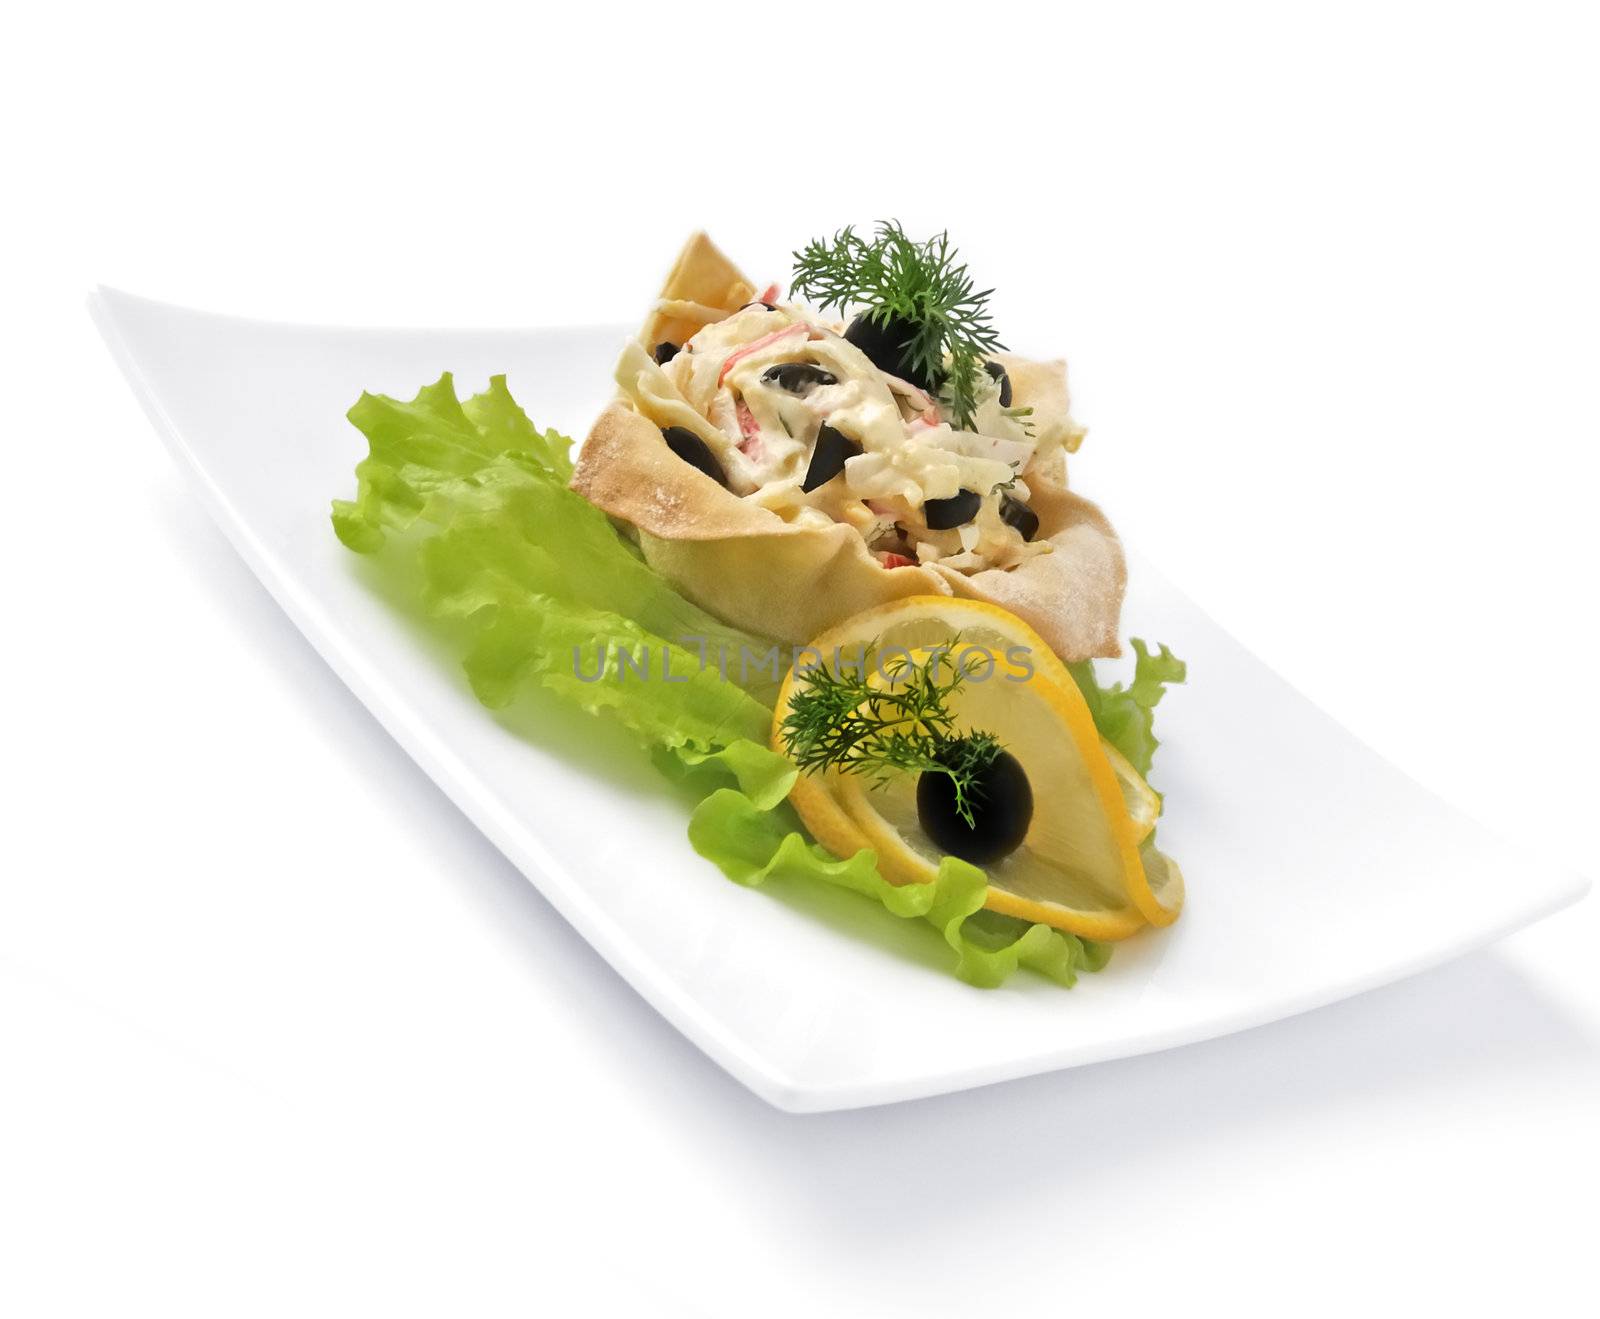 Salad with crab meat in a basket by Apolonia